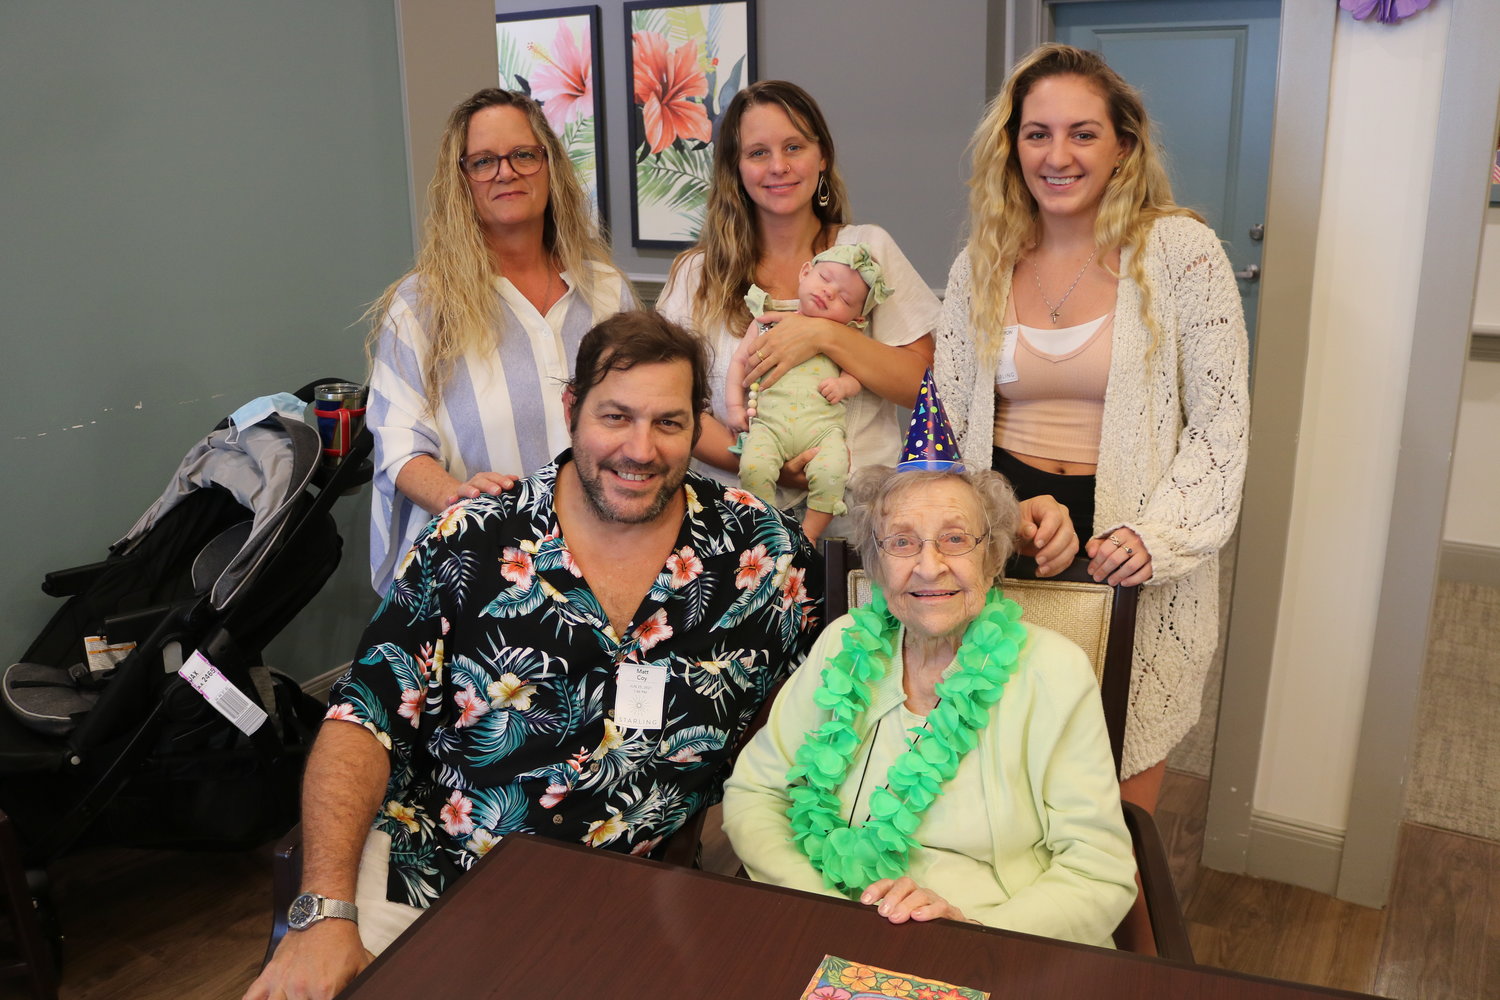 Dorothy Coy celebrated her 102nd birthday June 25 at Starling at Nocatee Assisted Living & Memory Care with members of her family gathered around. From left are: sitting, Matt Coy and Dorothy Coy; standing, Jennifer Coy, Chanel Peddicord holding baby Willow, and Cameron Coy.